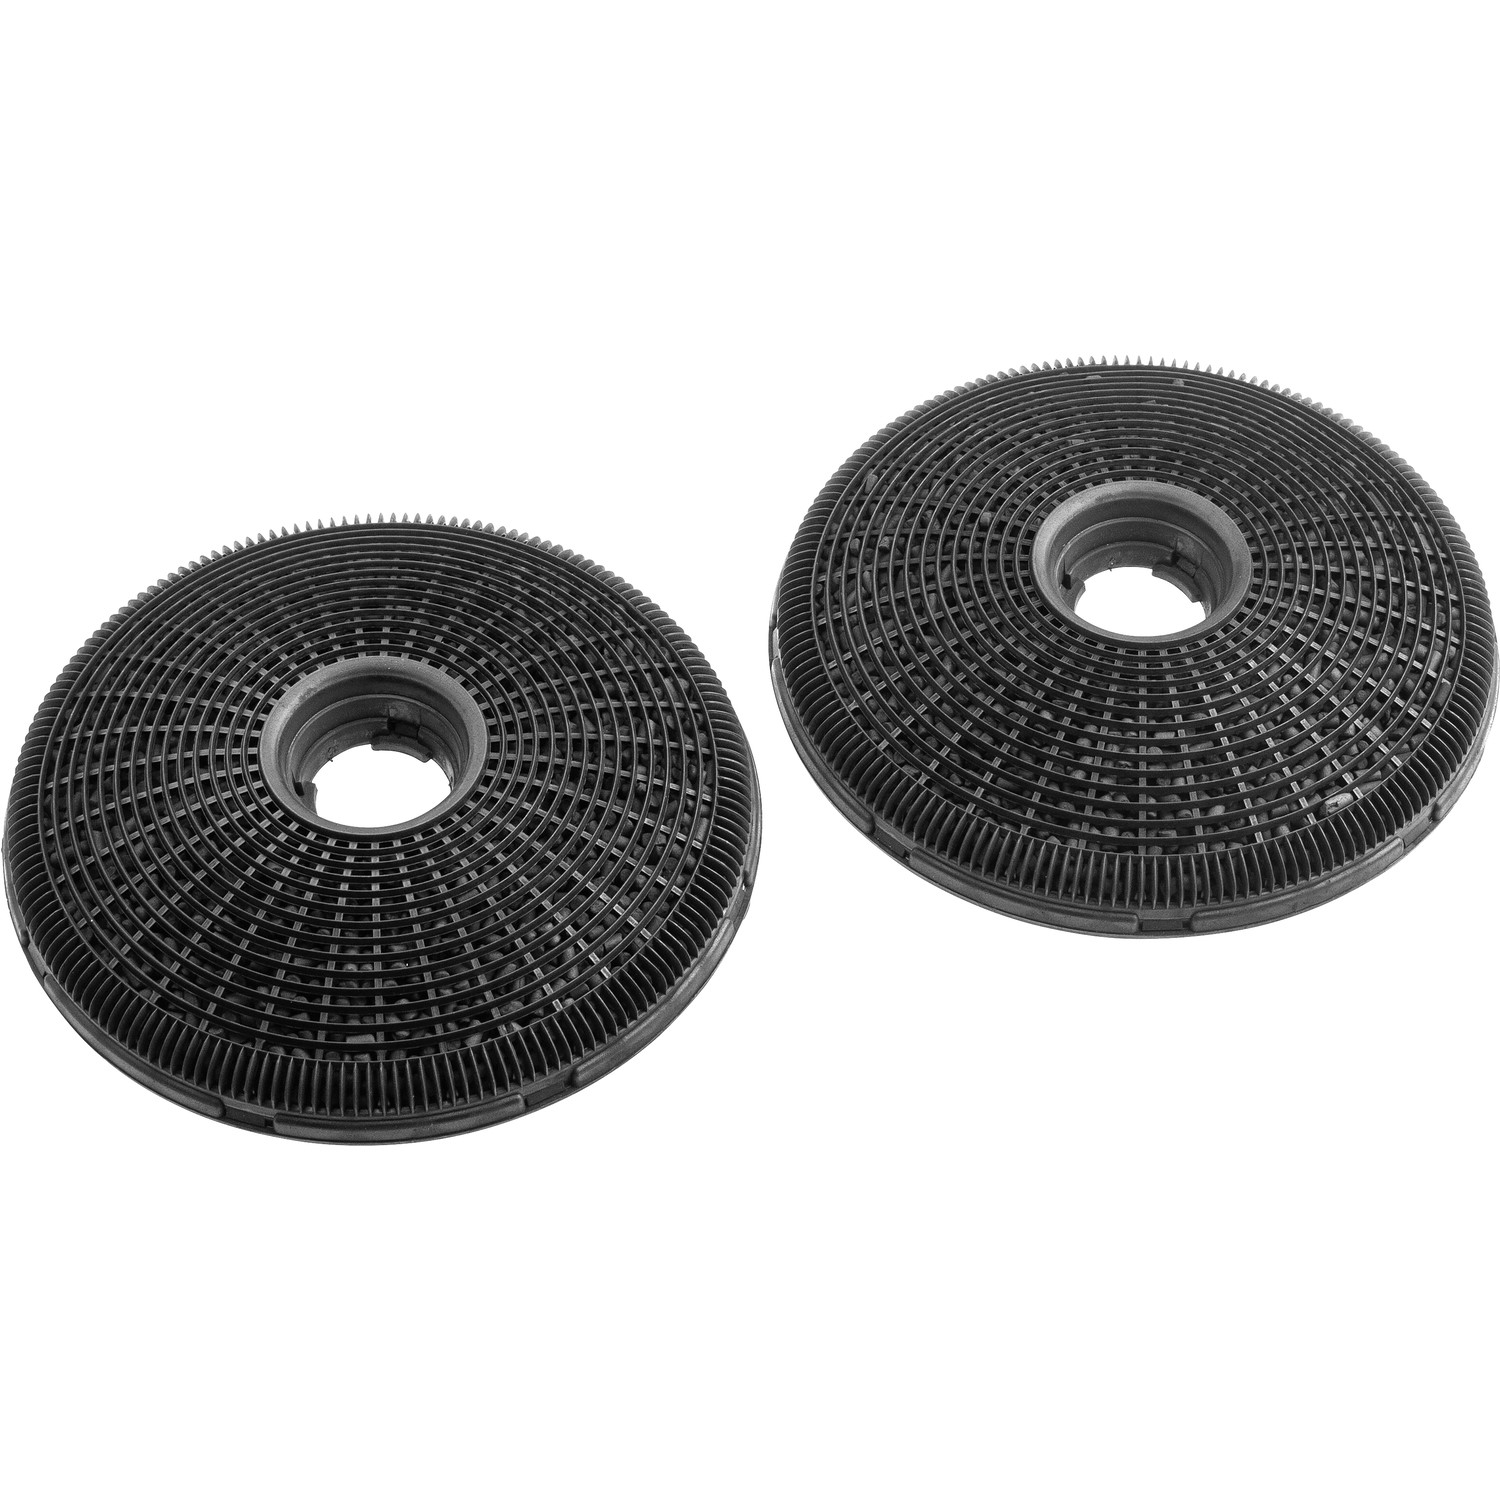 Electrolux ECFB02 Pair of Charcoal Filters for DGB3850M